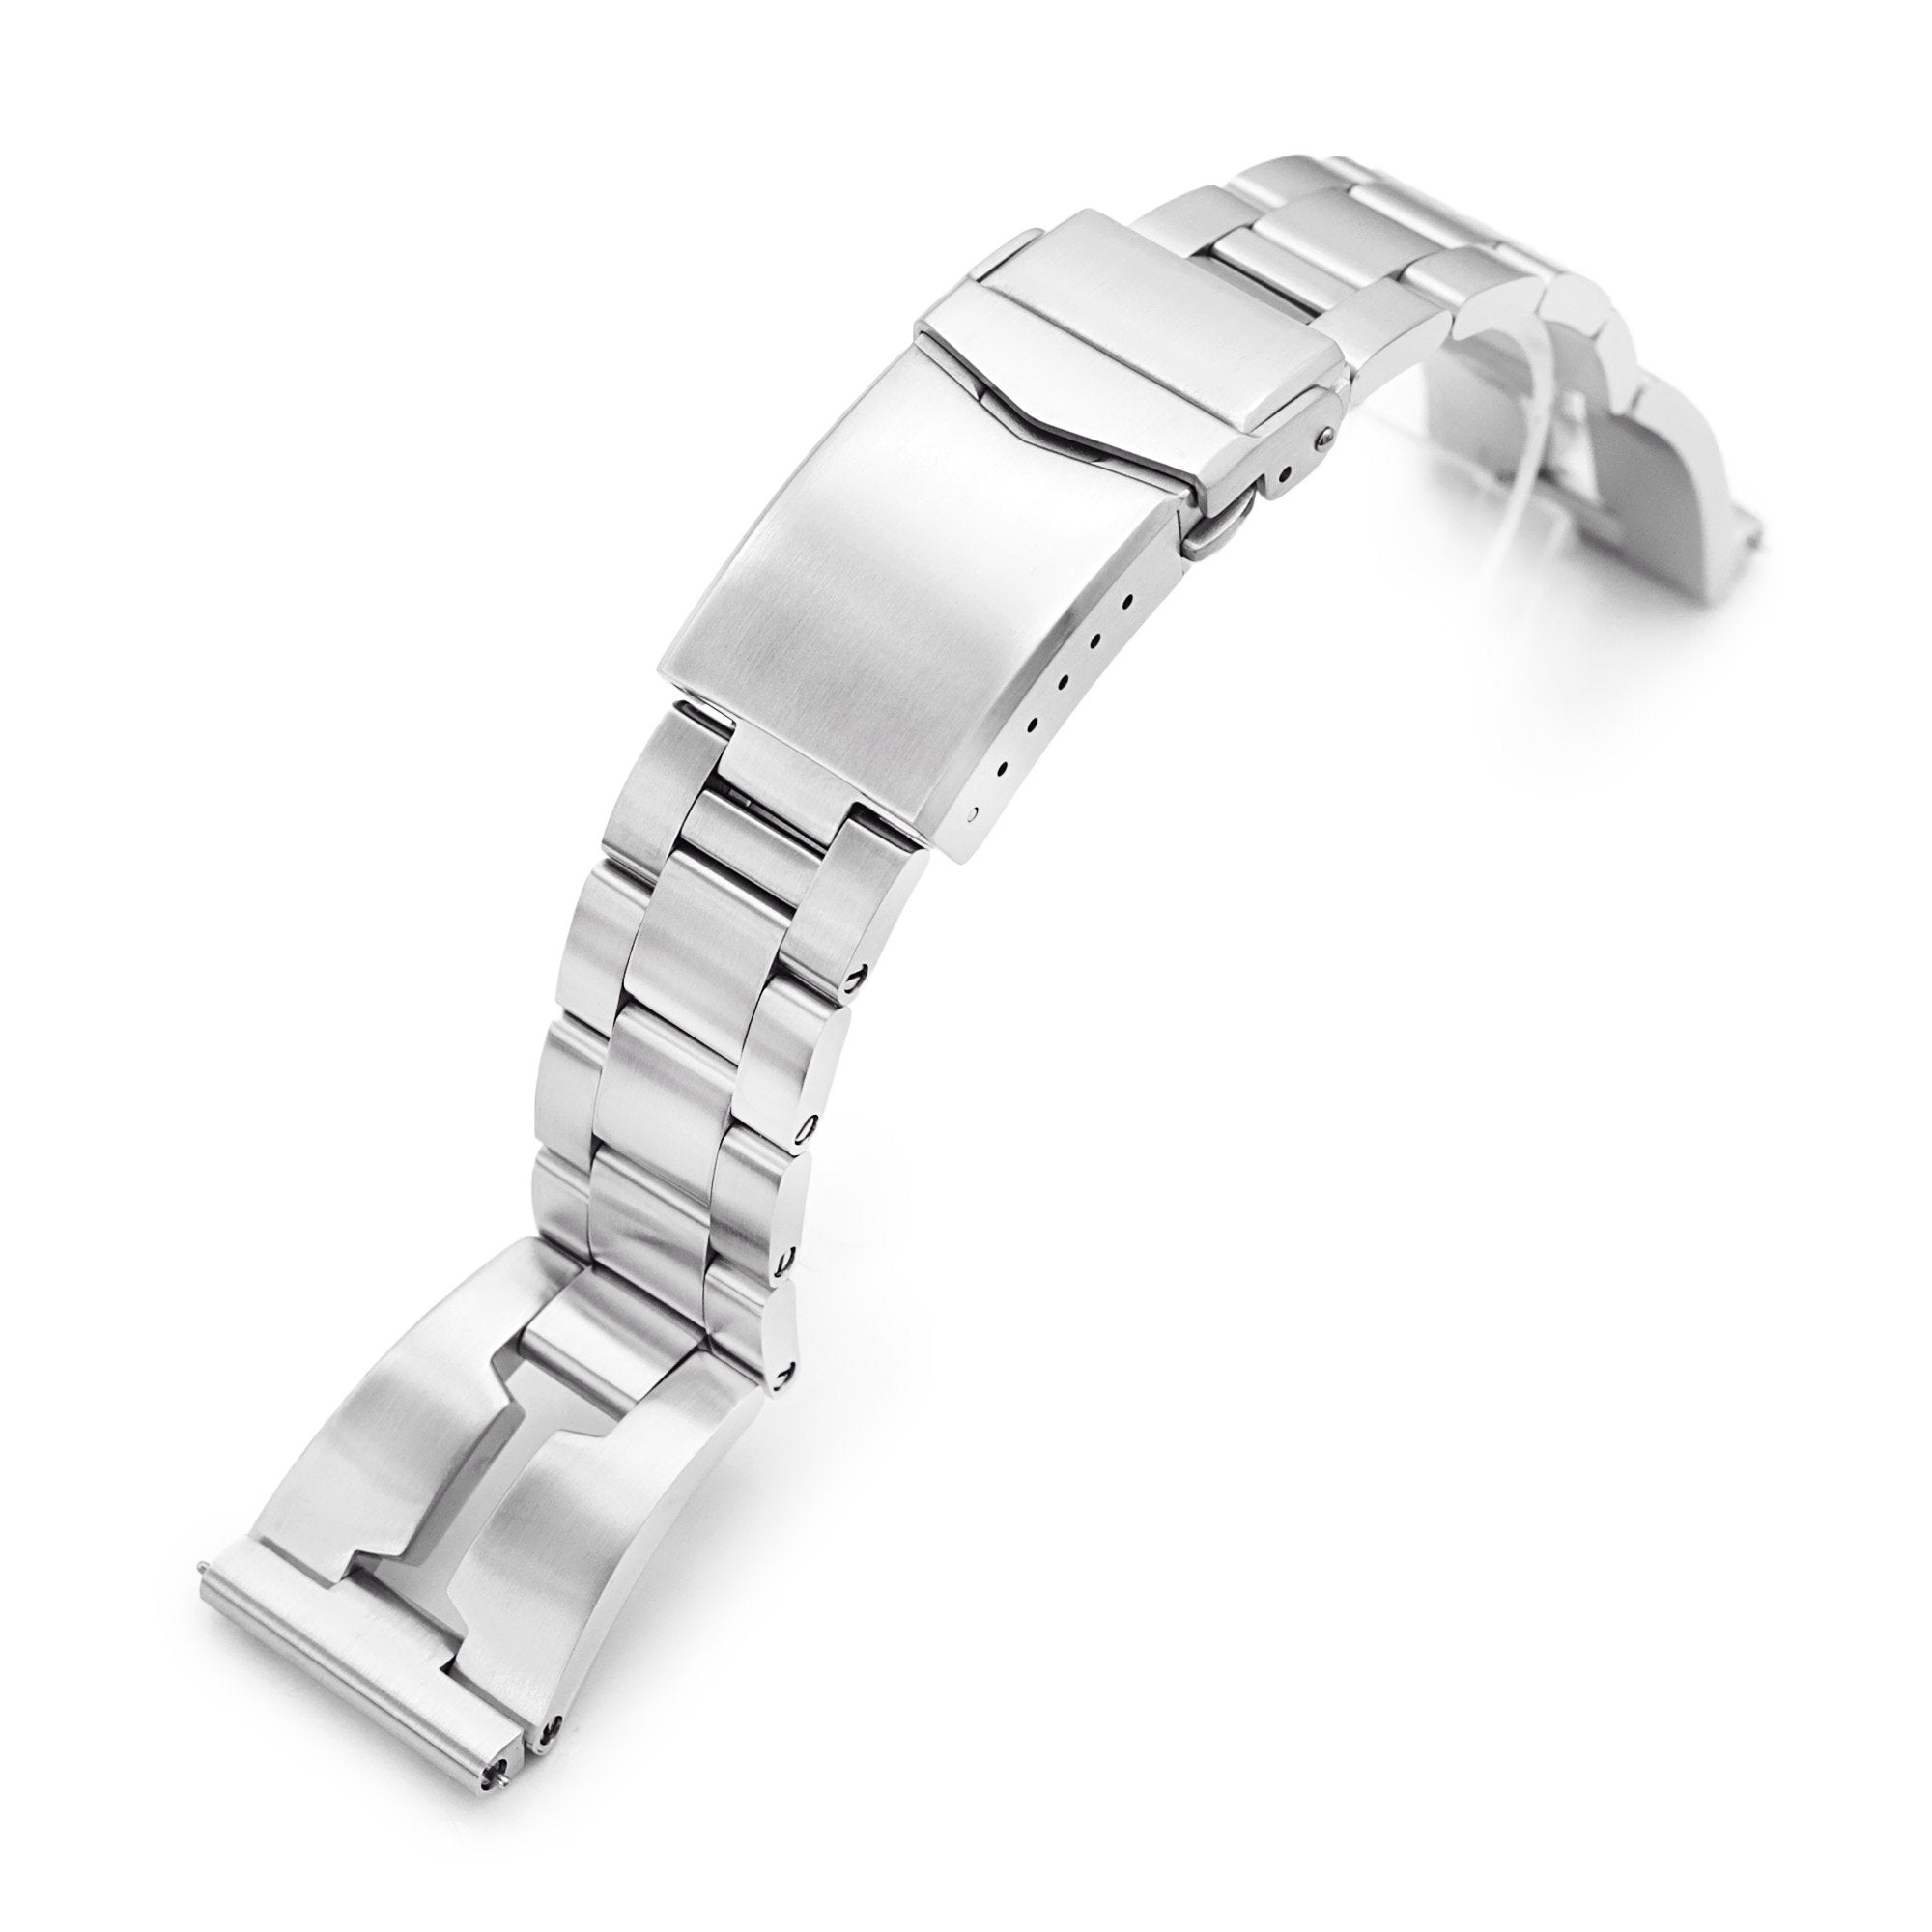 22mm Retro Razor QR Watch Band Straight End Quick Release, 316L Stainless Steel Brushed V-Clasp Strapcode Watch Bands